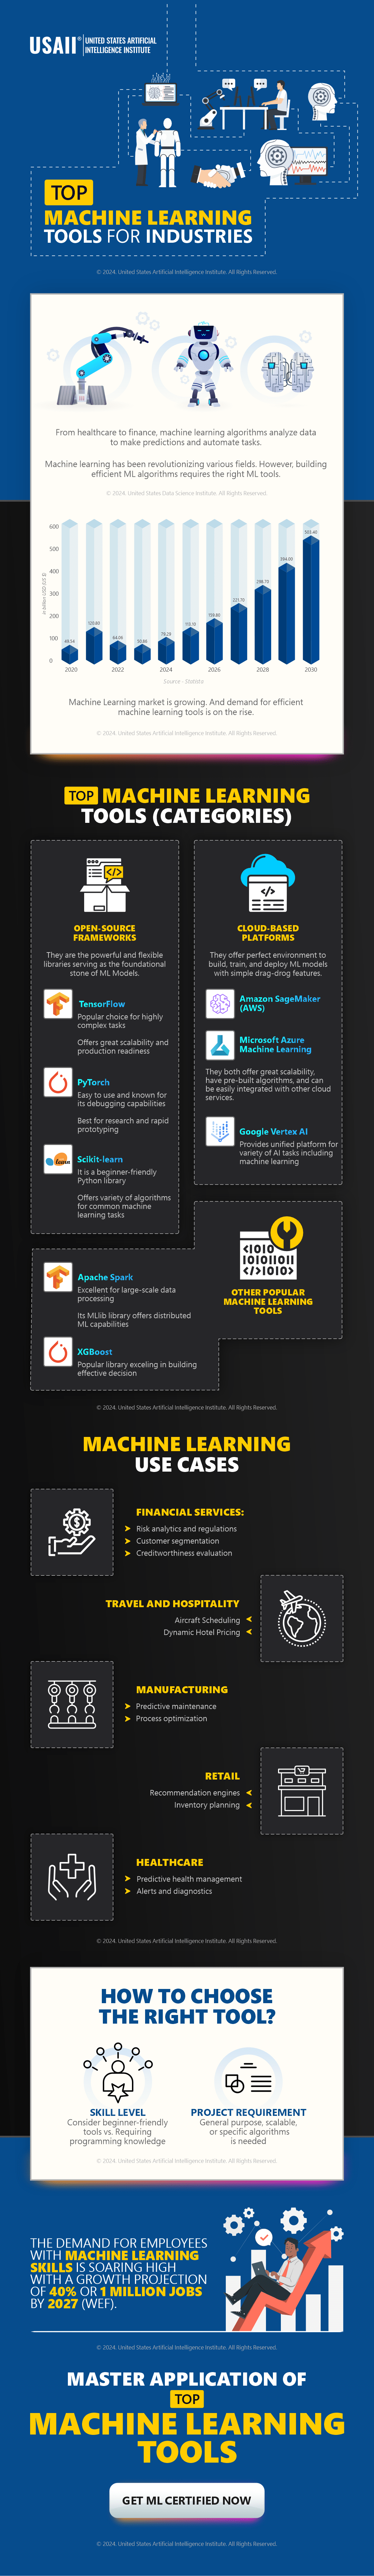 Top Machine Learning Tools For Industries